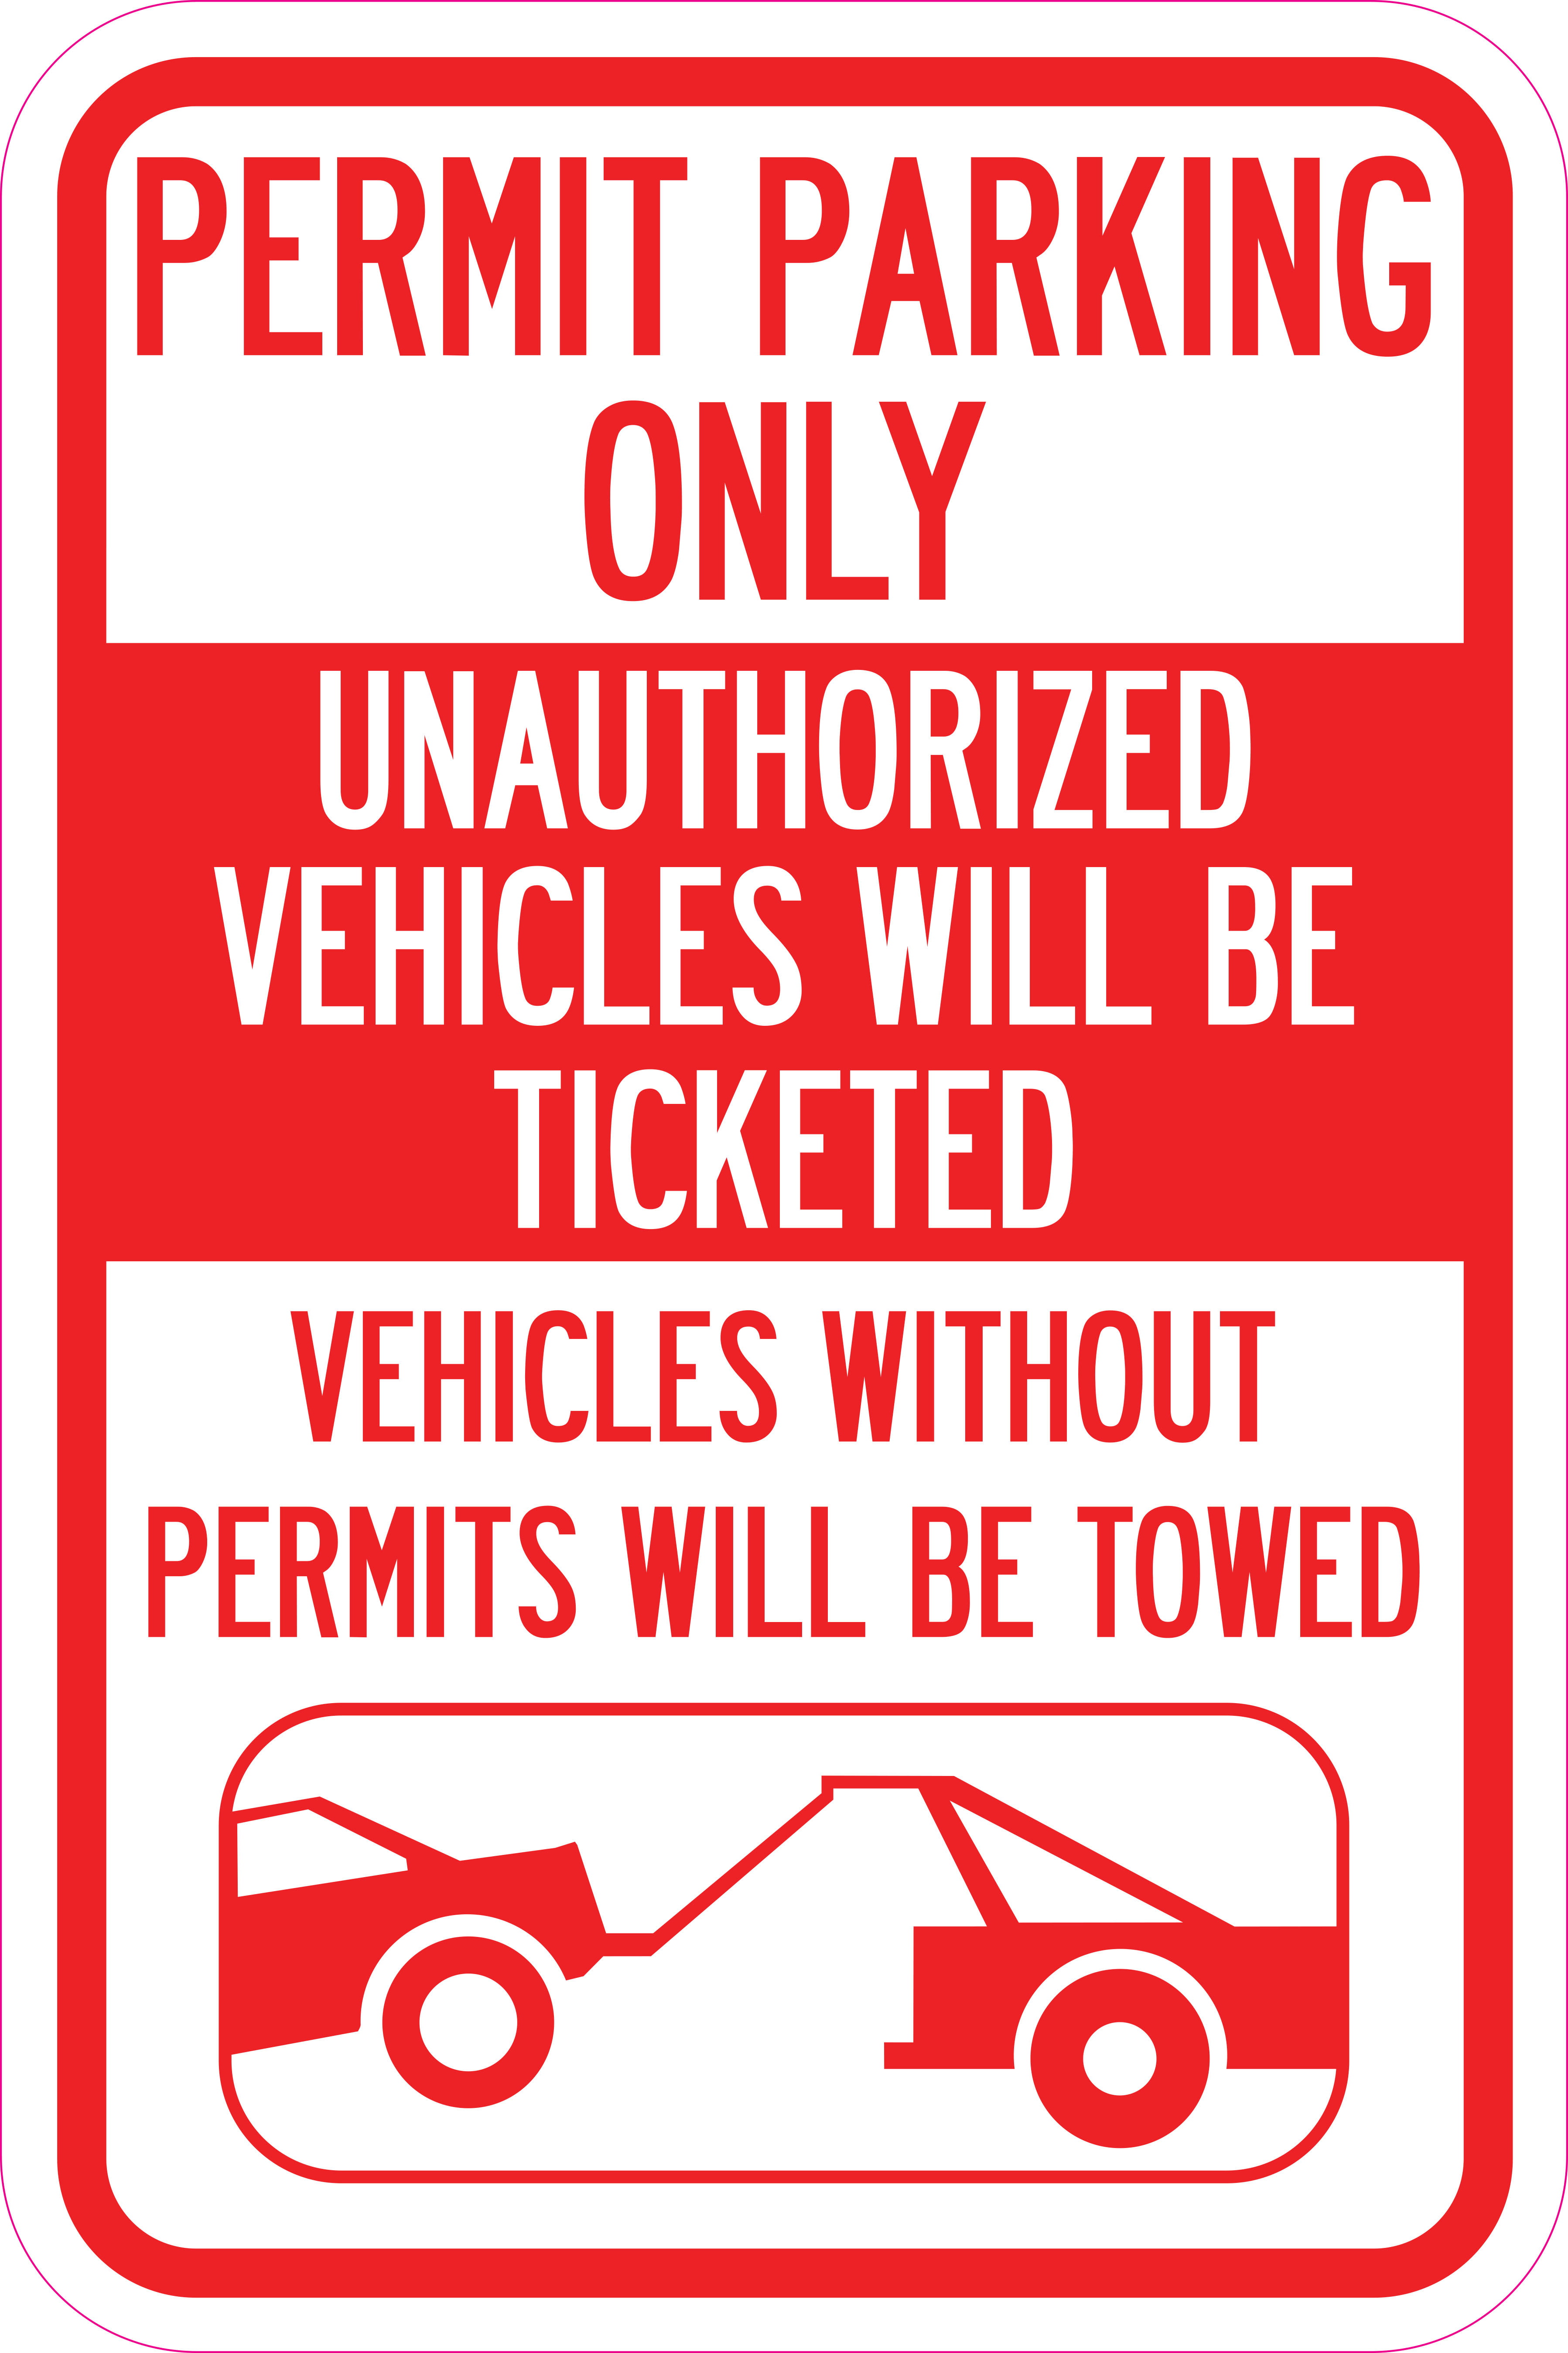 SignMission Designer Sign Se Requiere Permiso Para Aparcar Parking Permits Are Required in This Area Green & White 18 X 24 Aluminum Sign Unauthorized Vehicles Will Be Towed Aviso De Seguridad